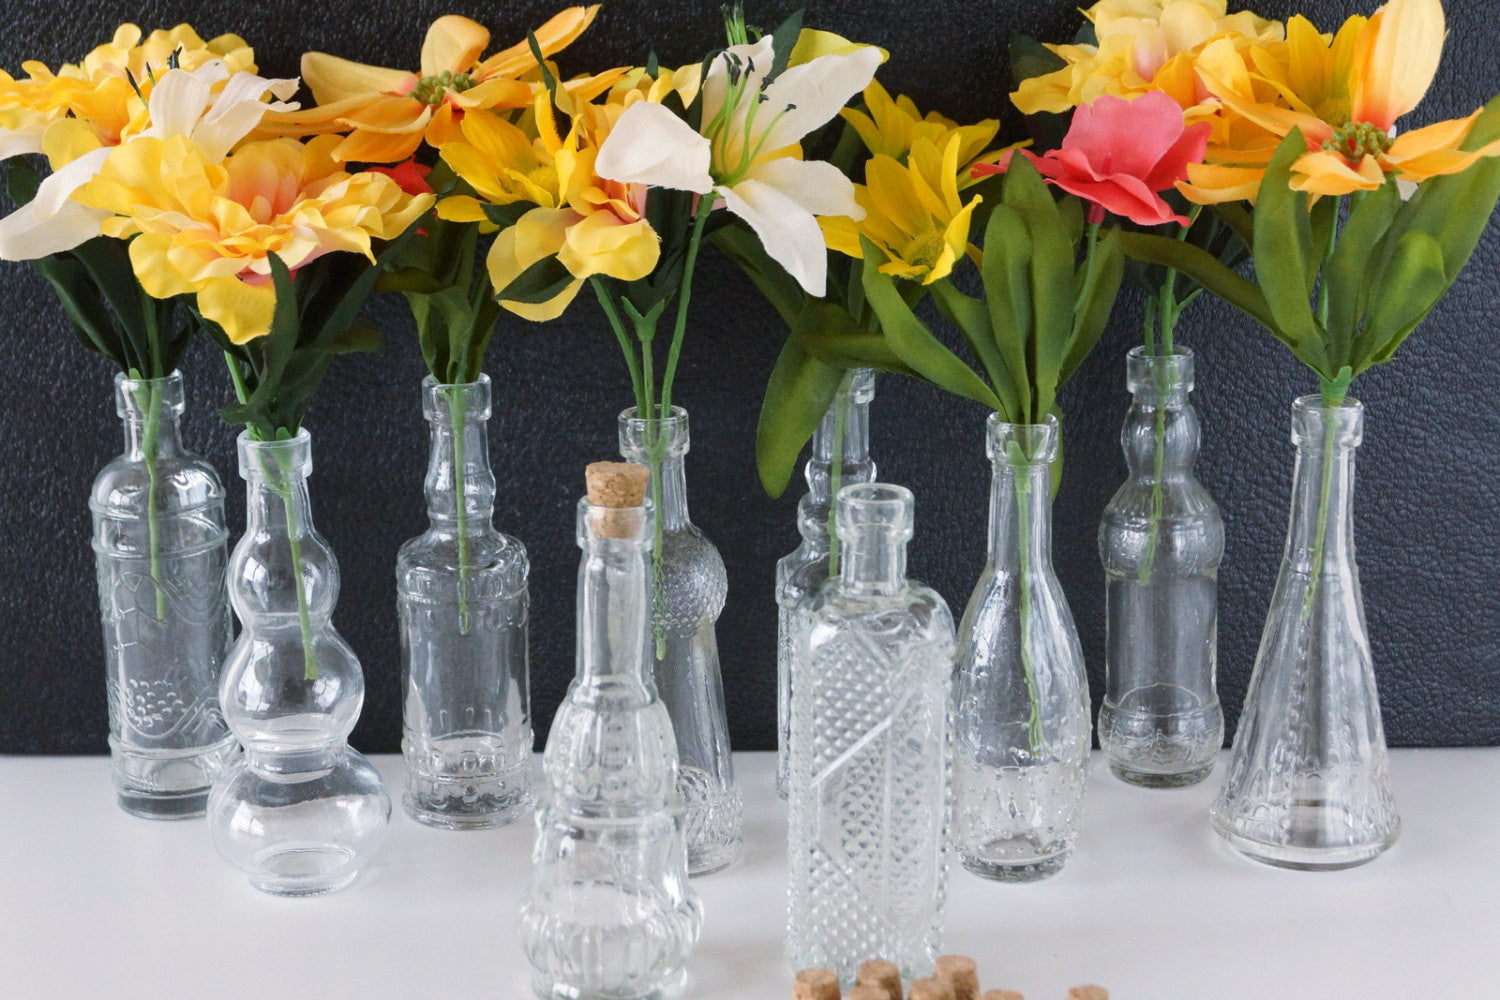 Decorative Clear Glass Bottles with Corks, 5" tall (Set of 10) - ThirdShiftVintage.com